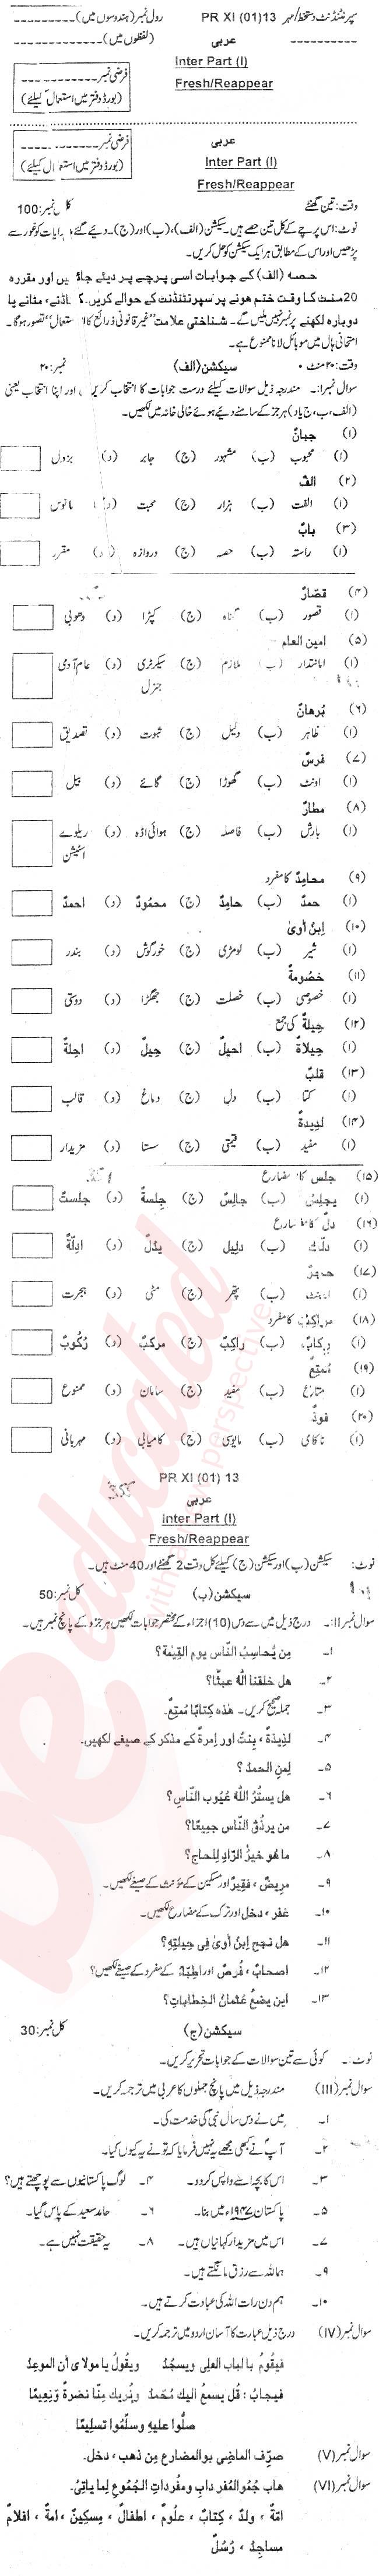 Arabic FA Part 1 Past Paper Group 1 BISE Malakand 2013